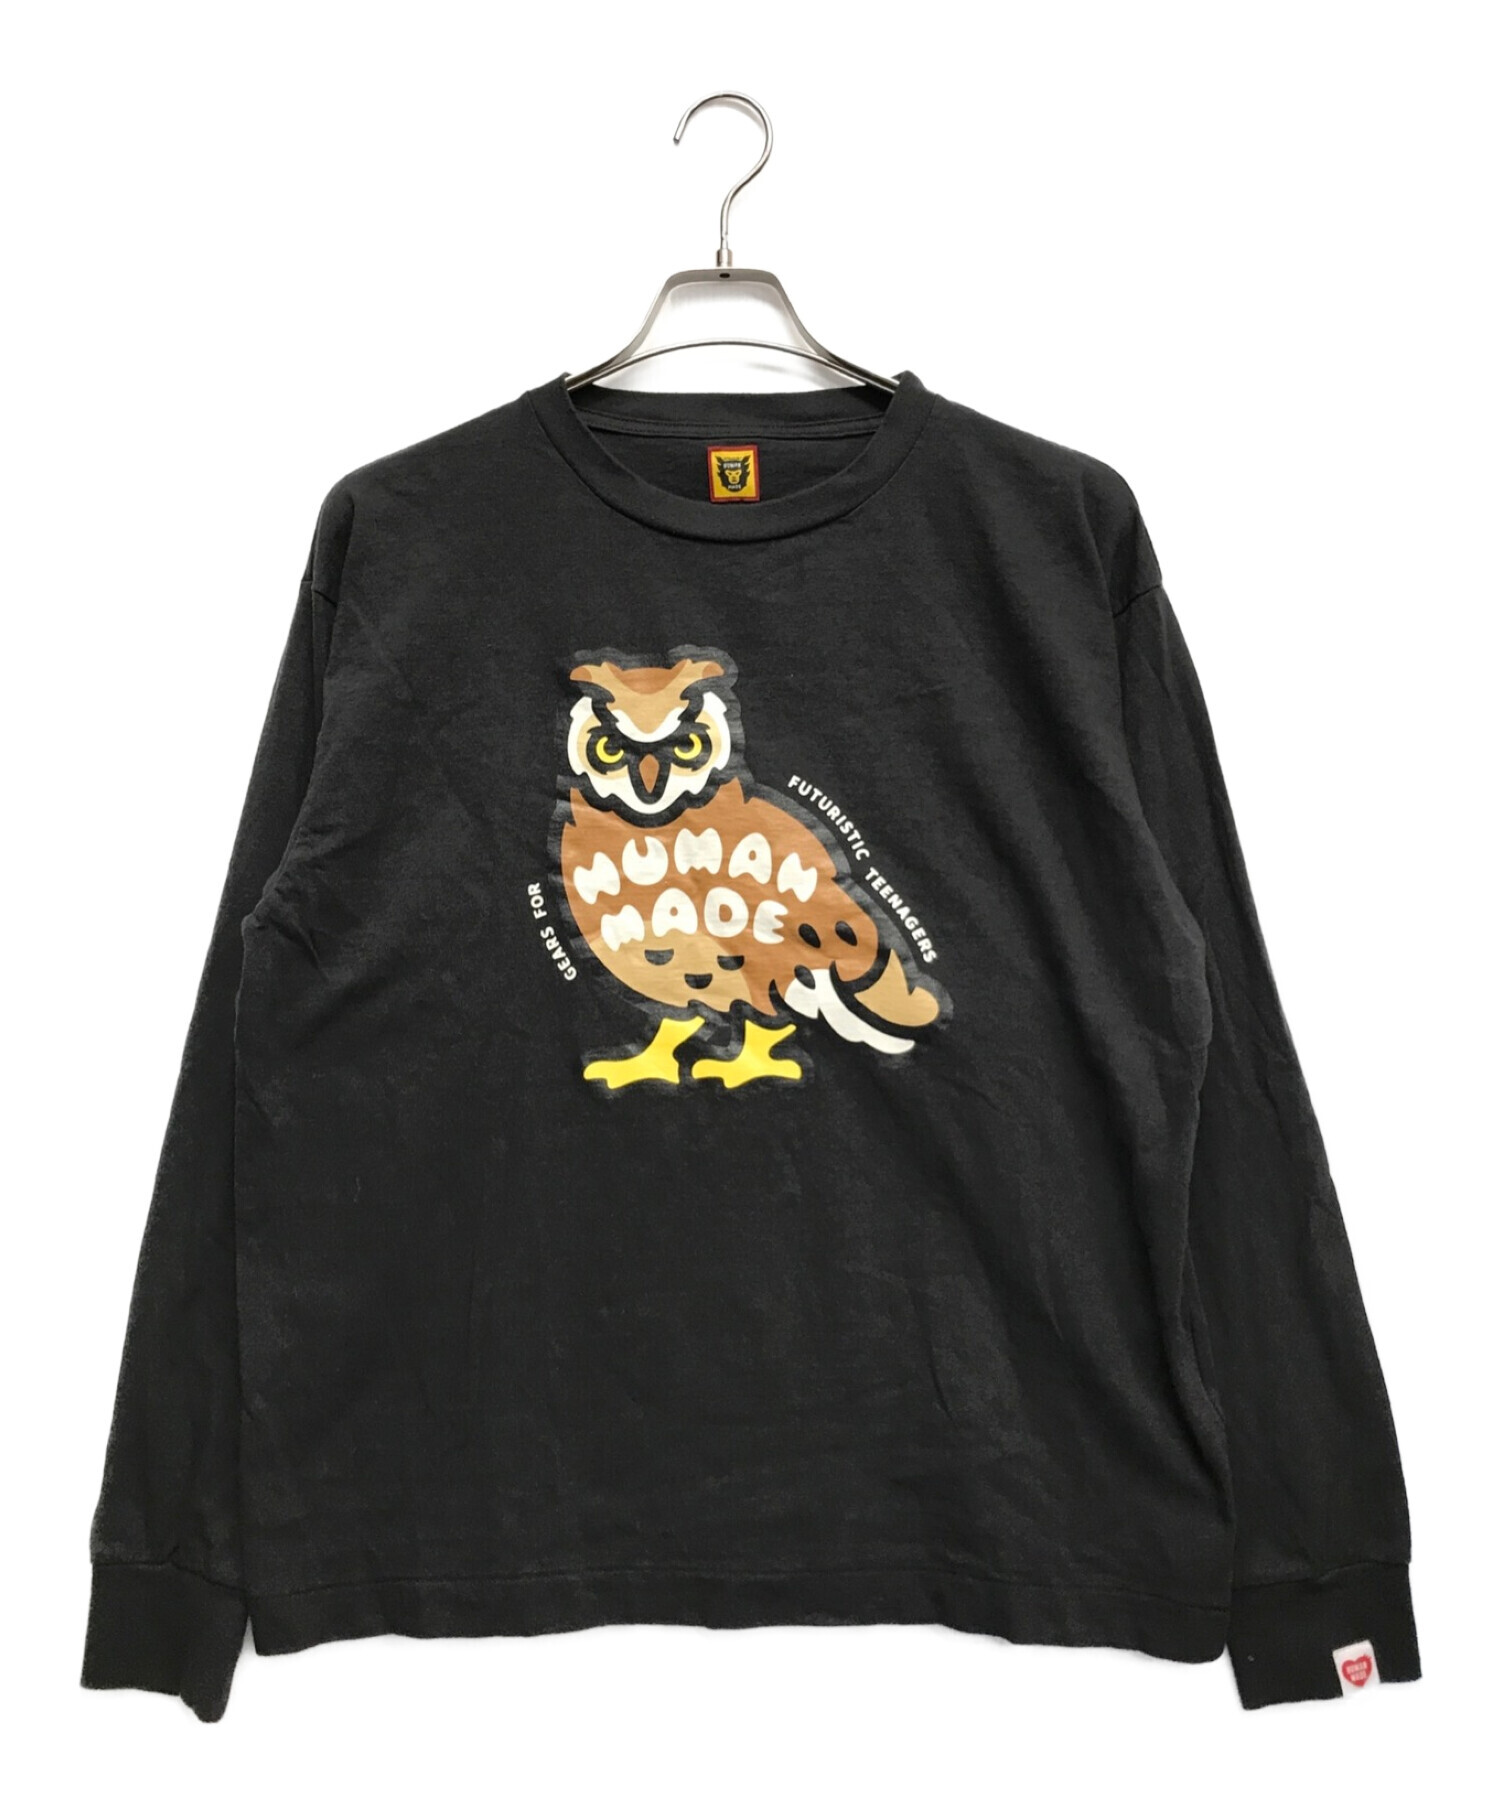 HUMAN MADE Graphic L/S T-Shirt #2 フクロウ 13000円引き - n3quimica